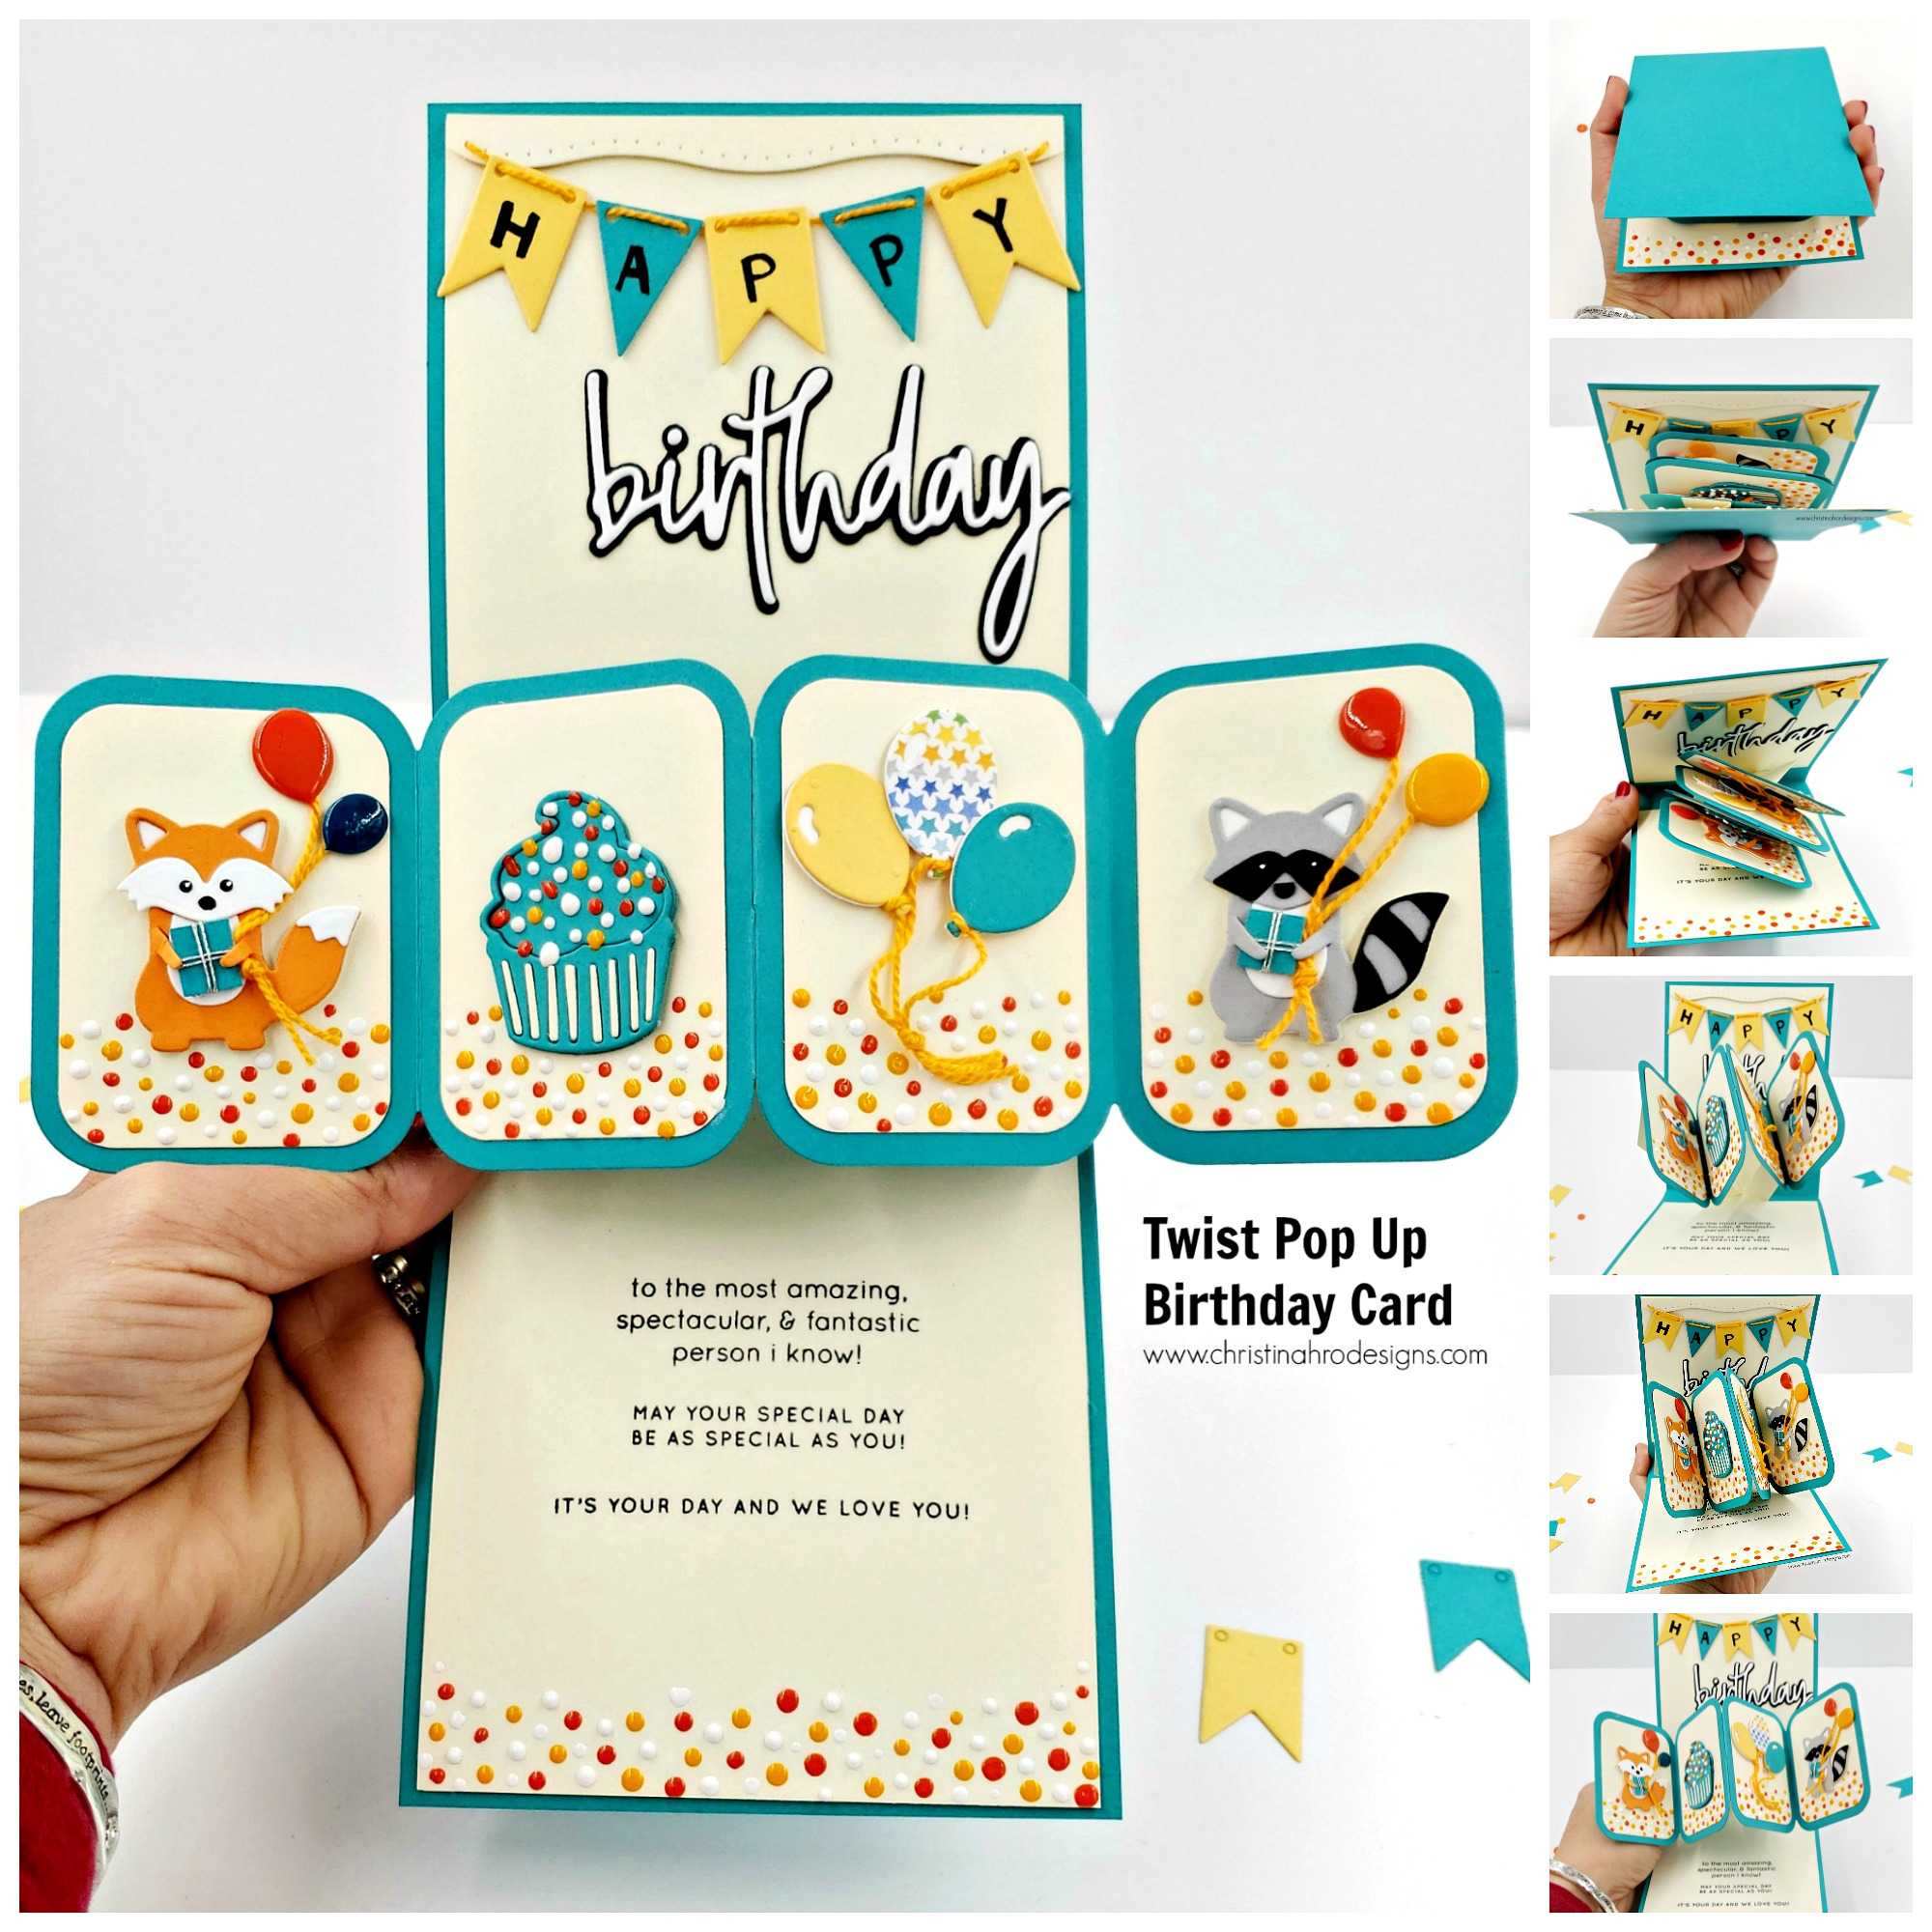 How To Make A Twist Pop Up Birthday Card | Christina Hor Designs Pertaining To Twisting Hearts Pop Up Card Template